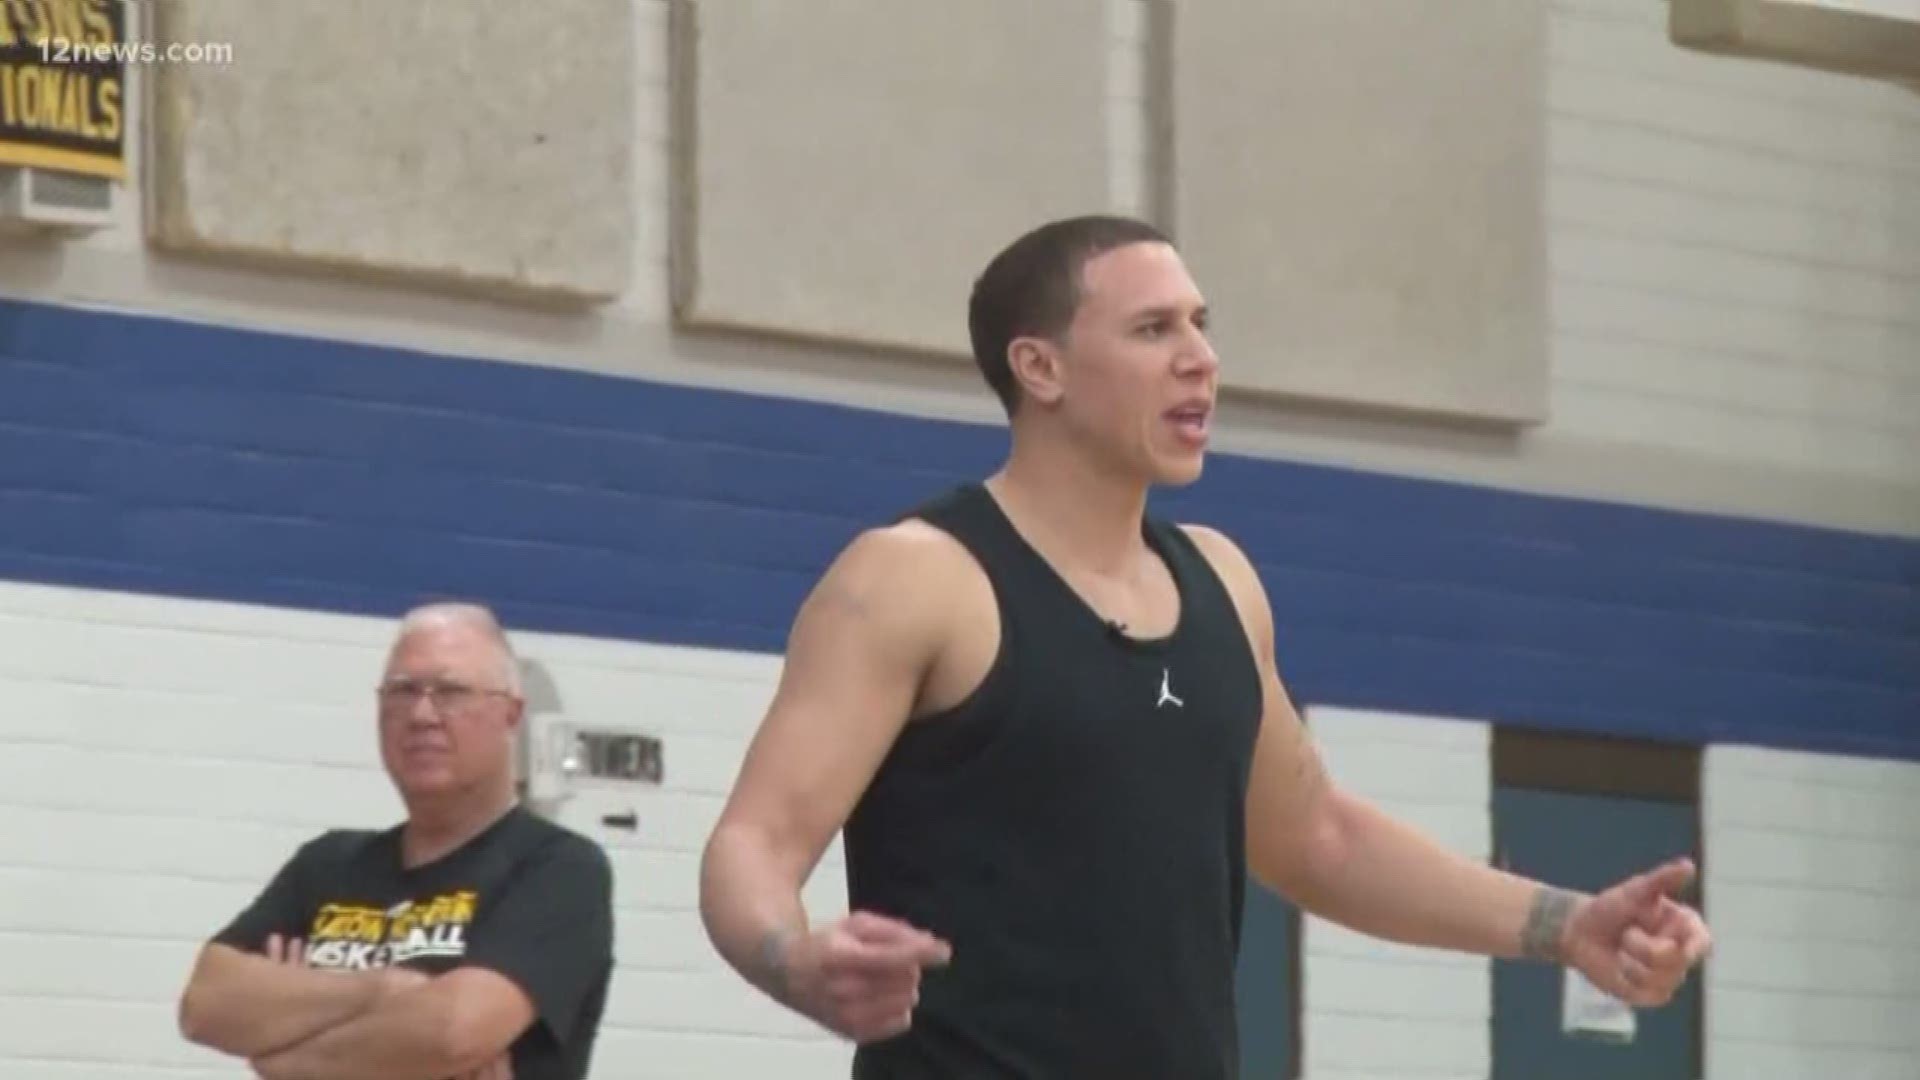 Former NBA star and Shadow Mountain High School basketball coach Mike Bibby will not fave criminal charges in a sexual assault case brought against Bibby by a teacher at the high school. No probable cause was found to recommend charges.